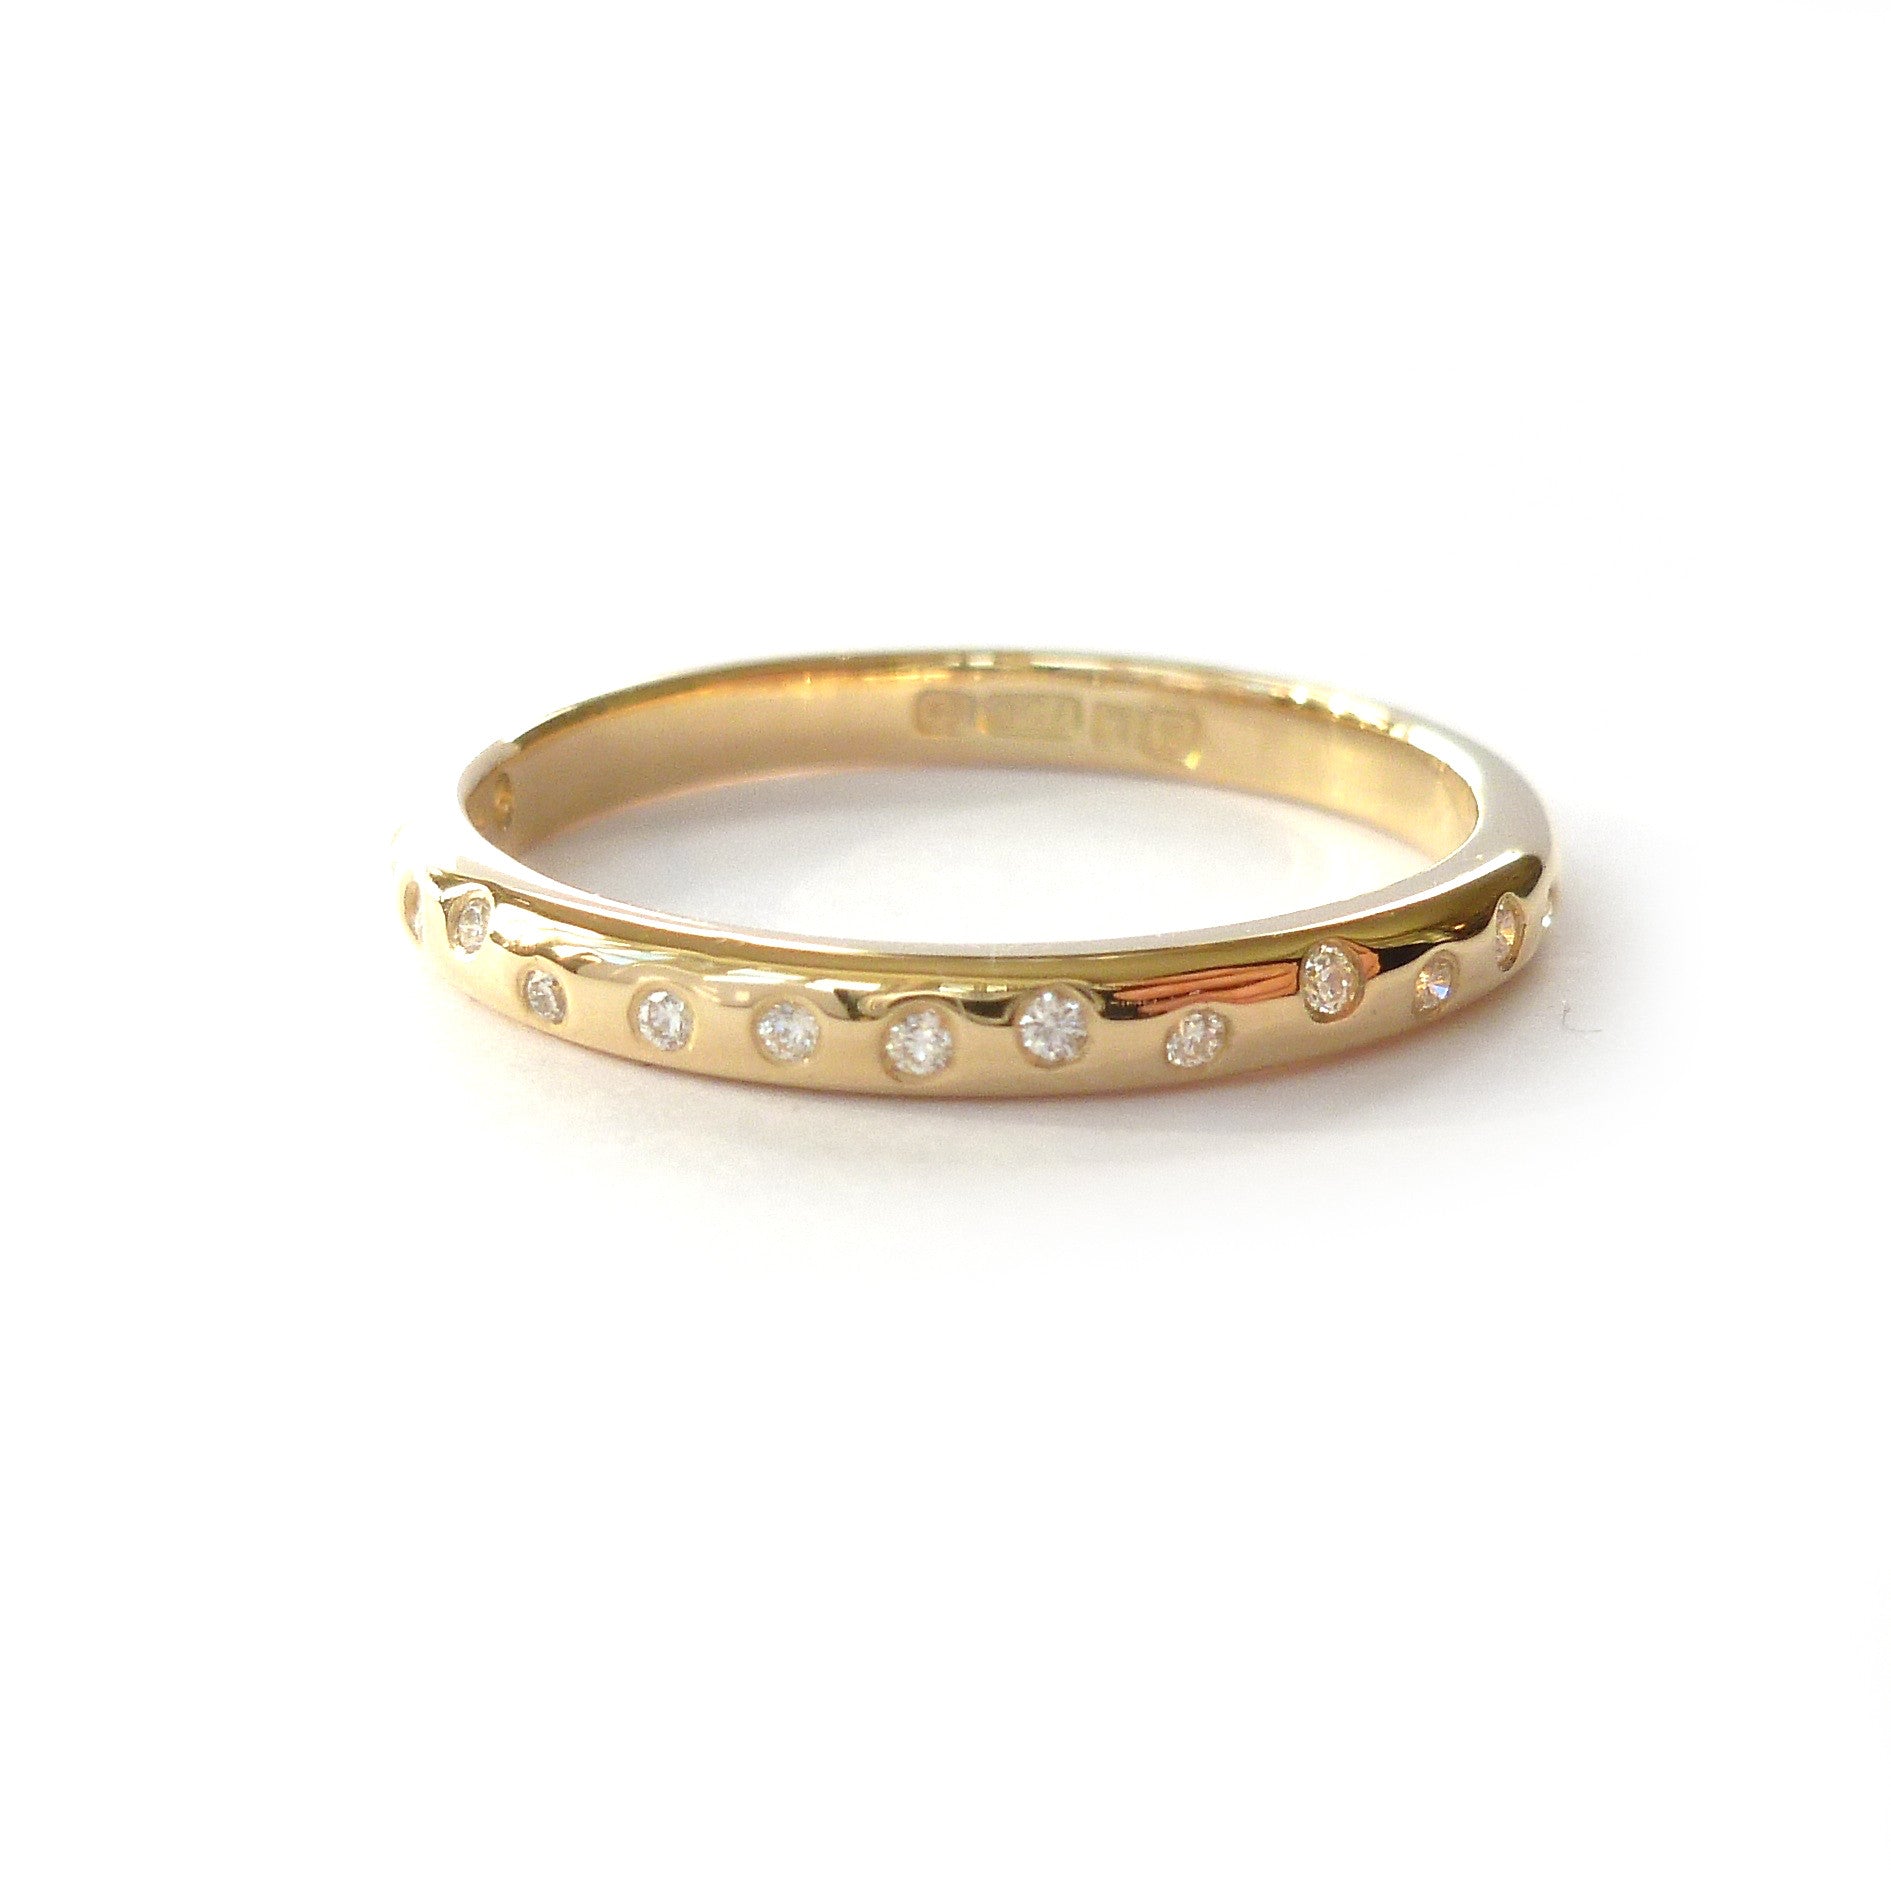 18ct gold and diamond ring - size K1/2